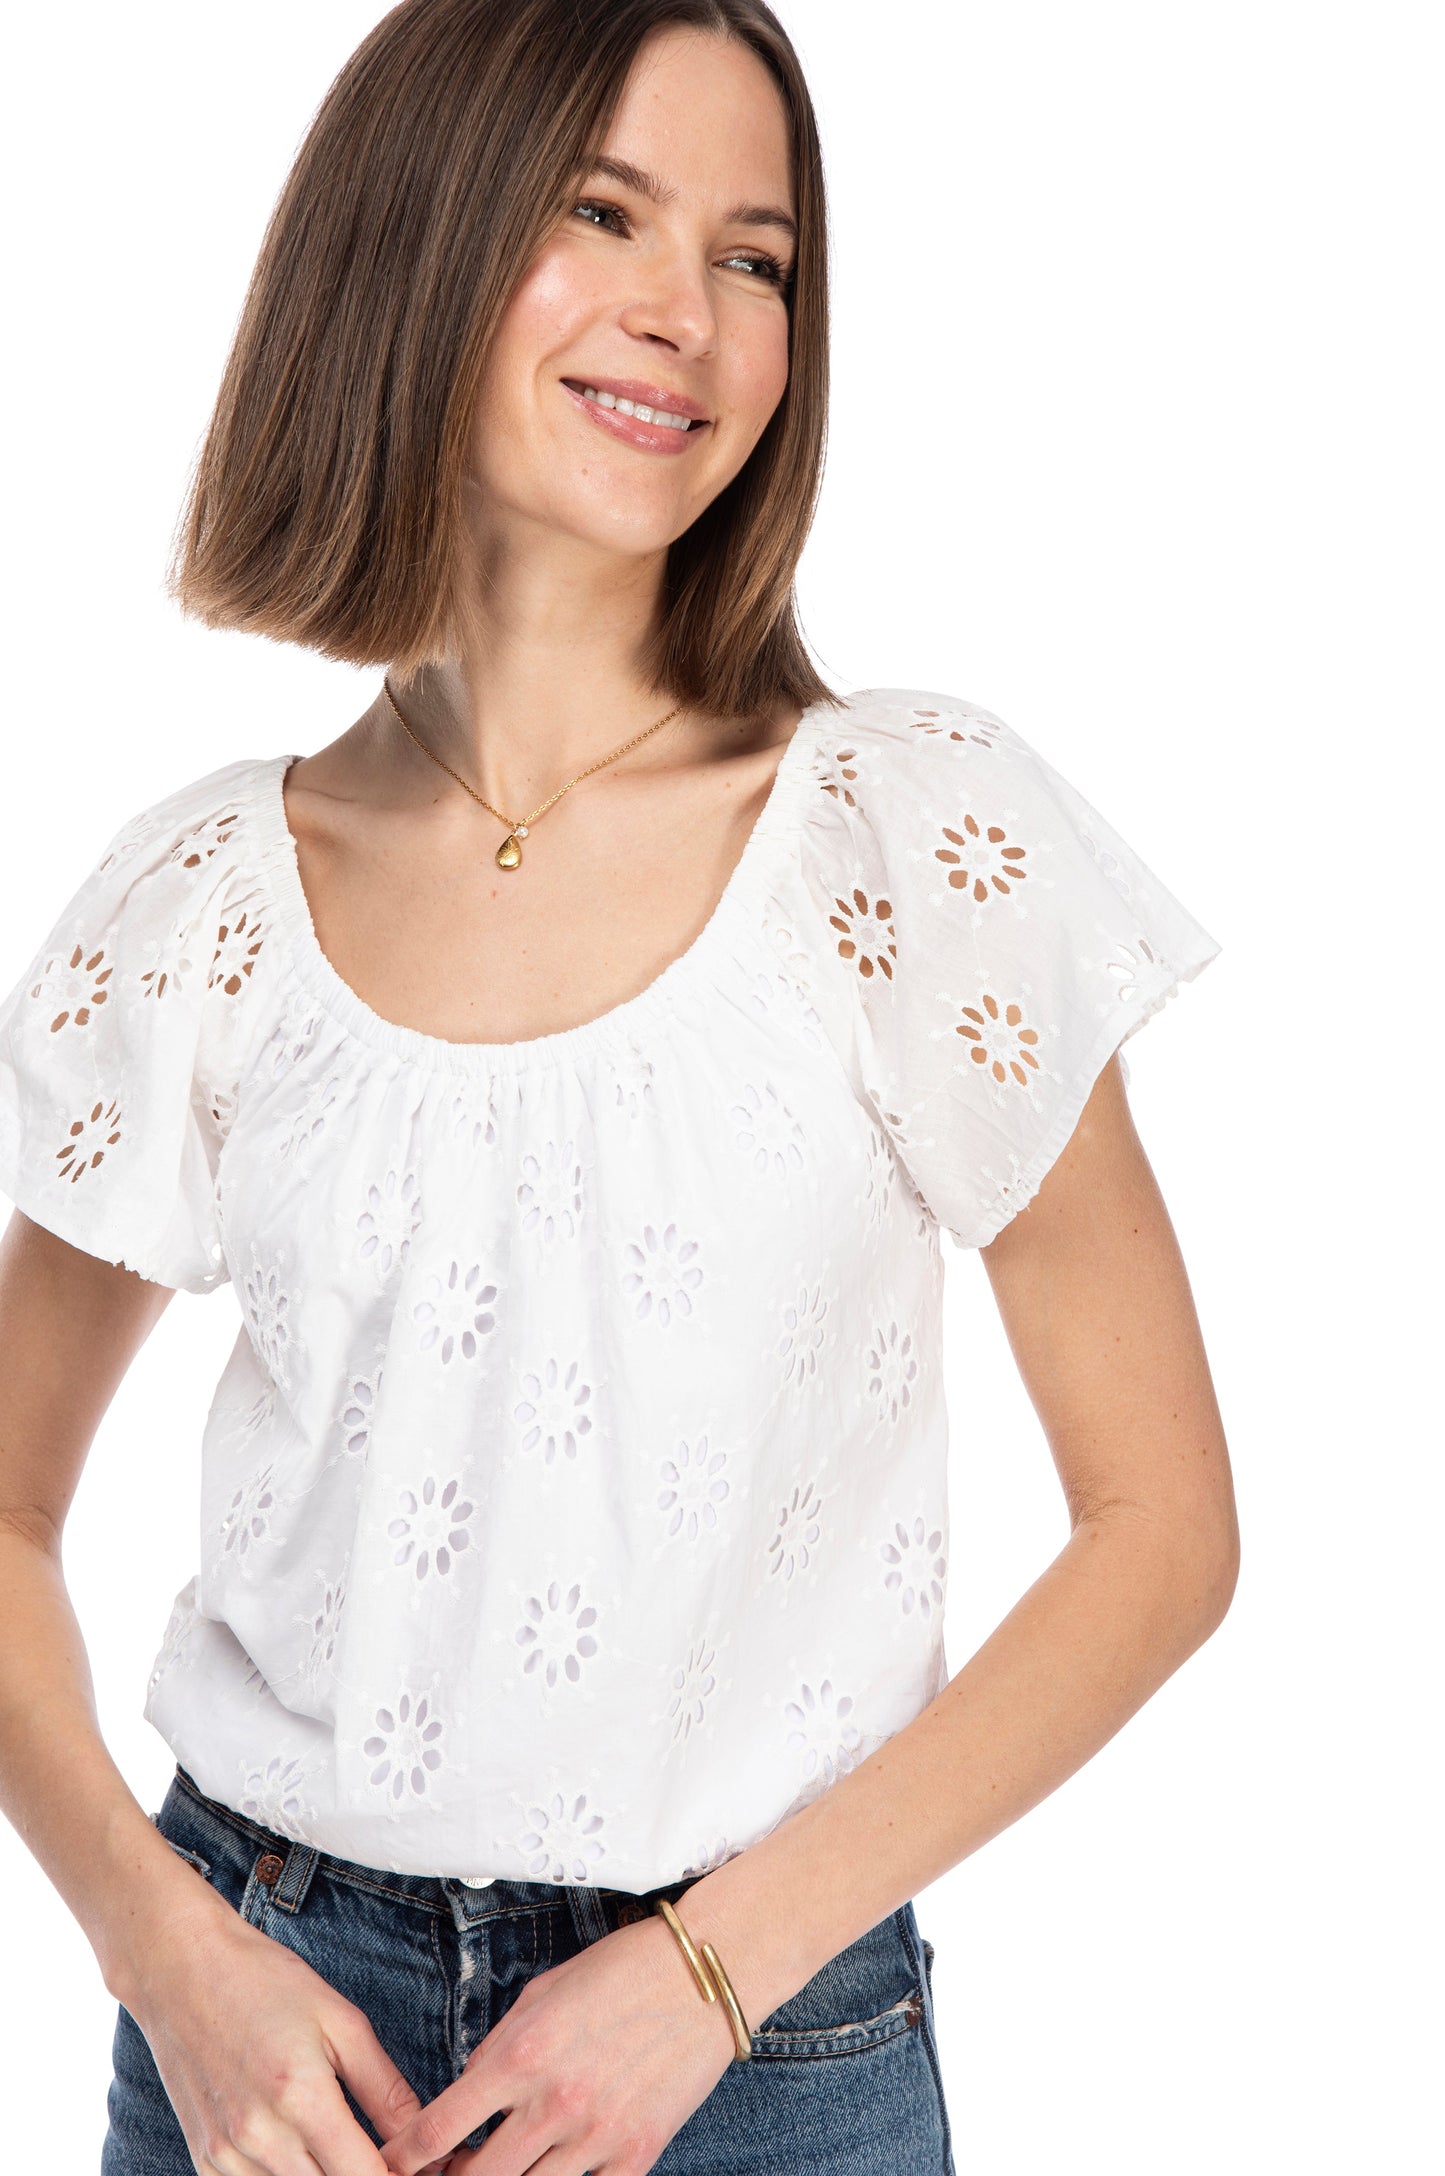 A smiling woman wearing a white eyelet SS PEASANT TOP by B Collection by Bobeau with an elastic neckline and denim jeans, looking off-camera with a relaxed and friendly demeanor.